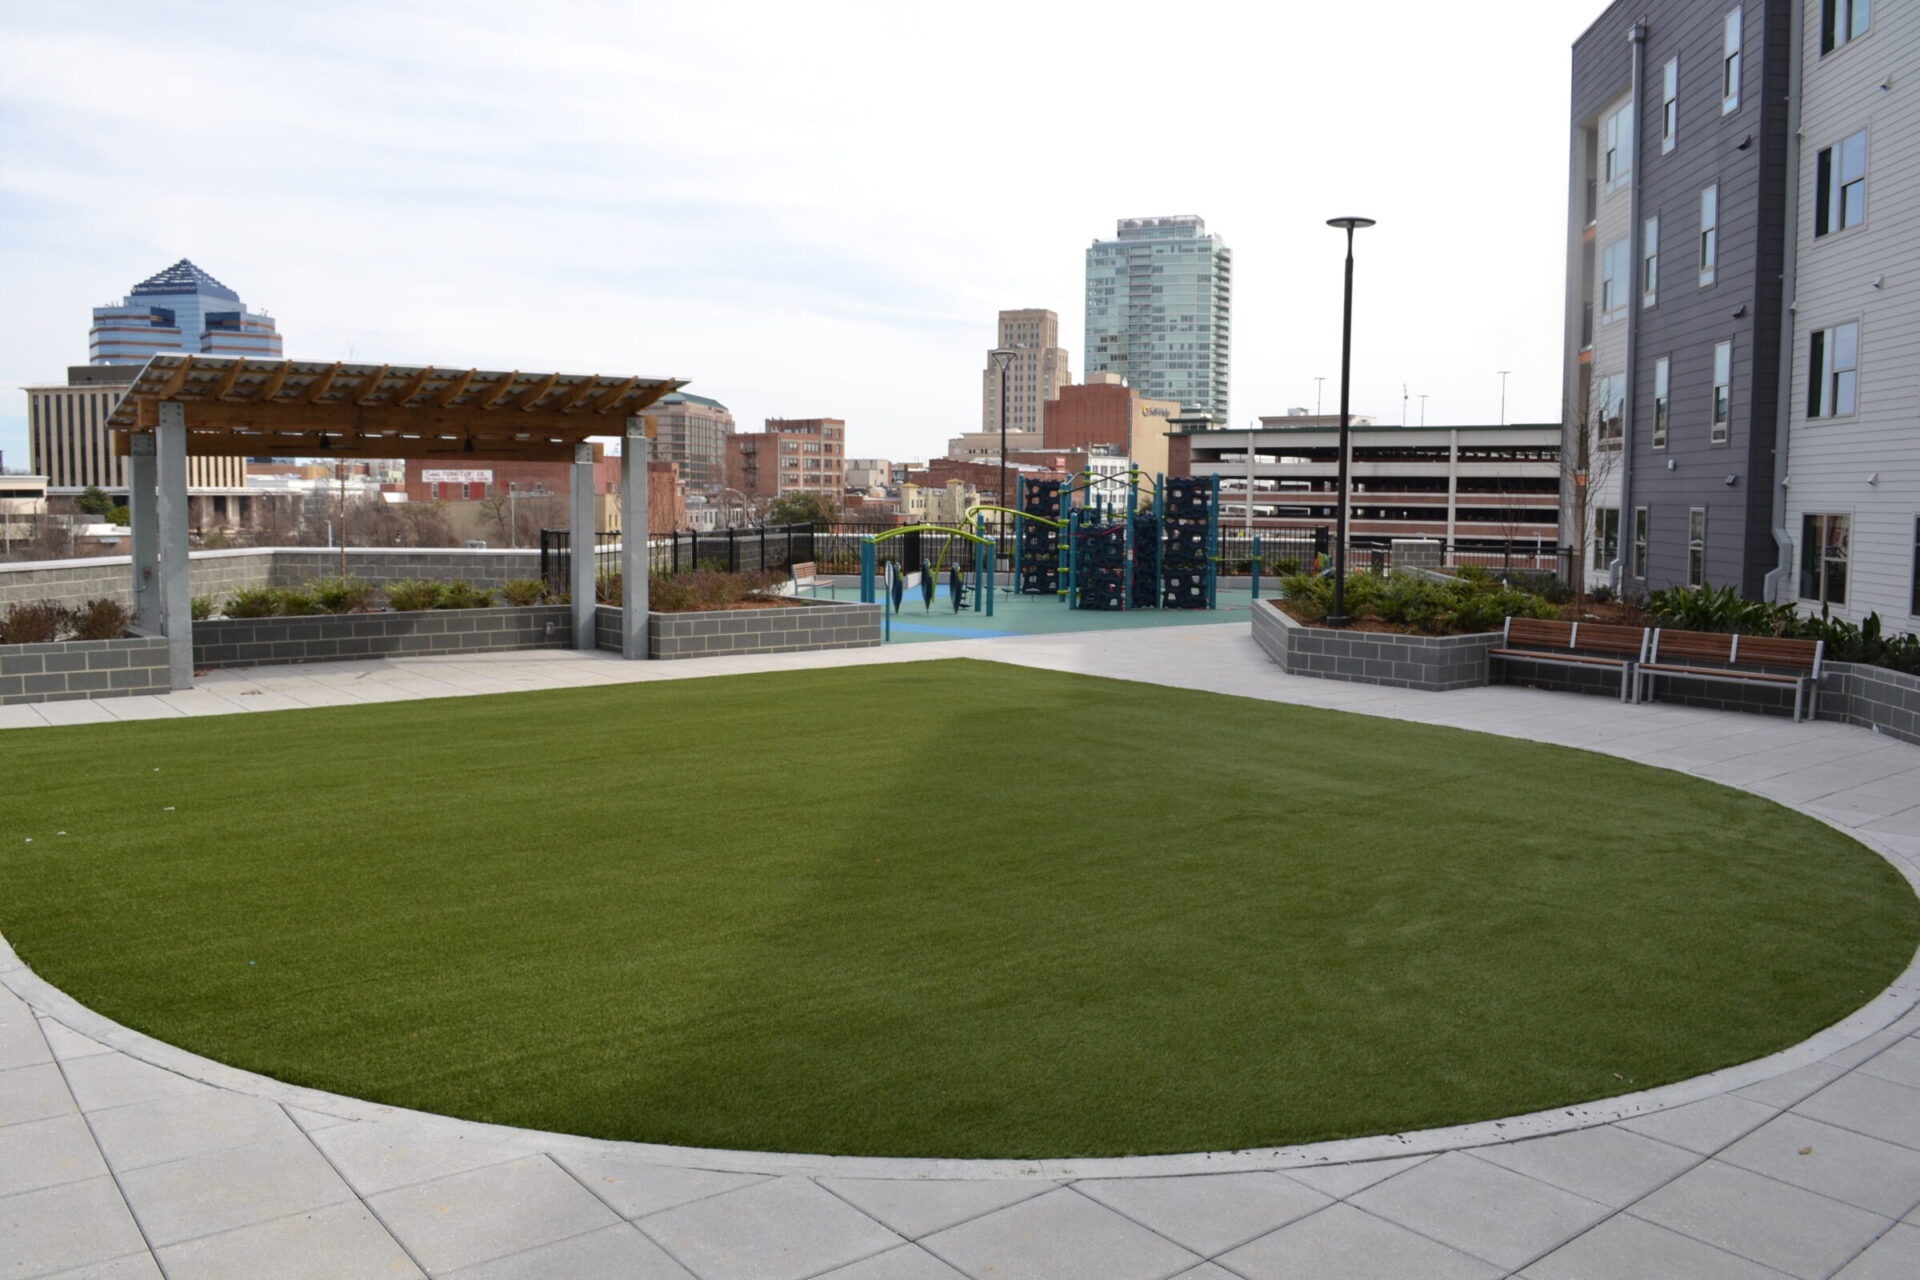 This image depicts a modern urban park with green artificial turf, a playground, seating areas, pergolas, and city buildings in the background.